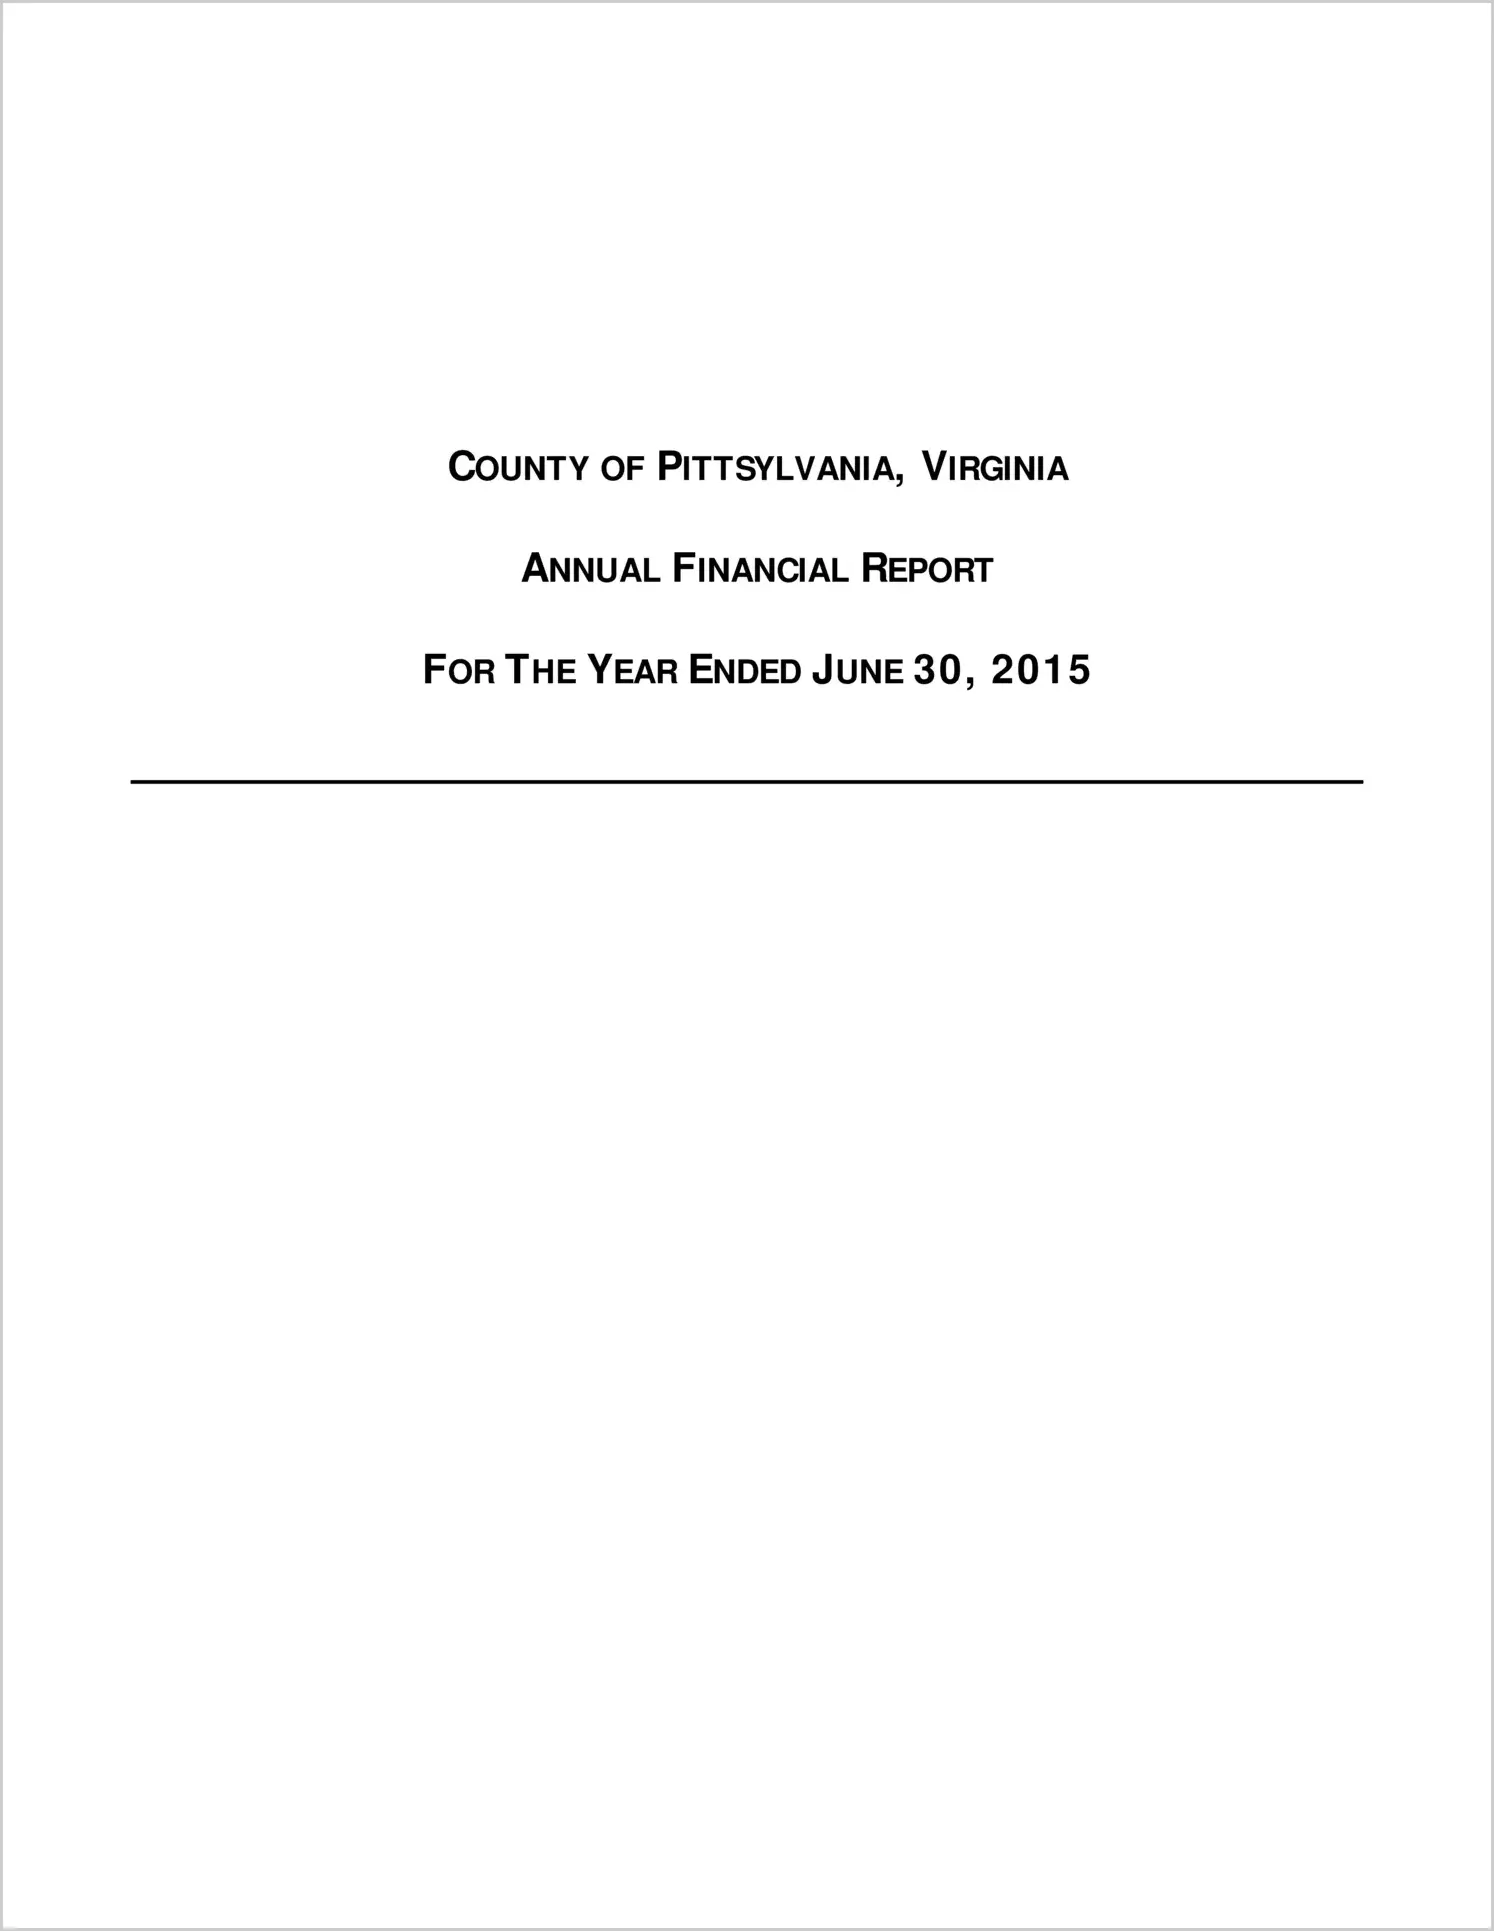 2015 Annual Financial Report for County of Pittsylvania